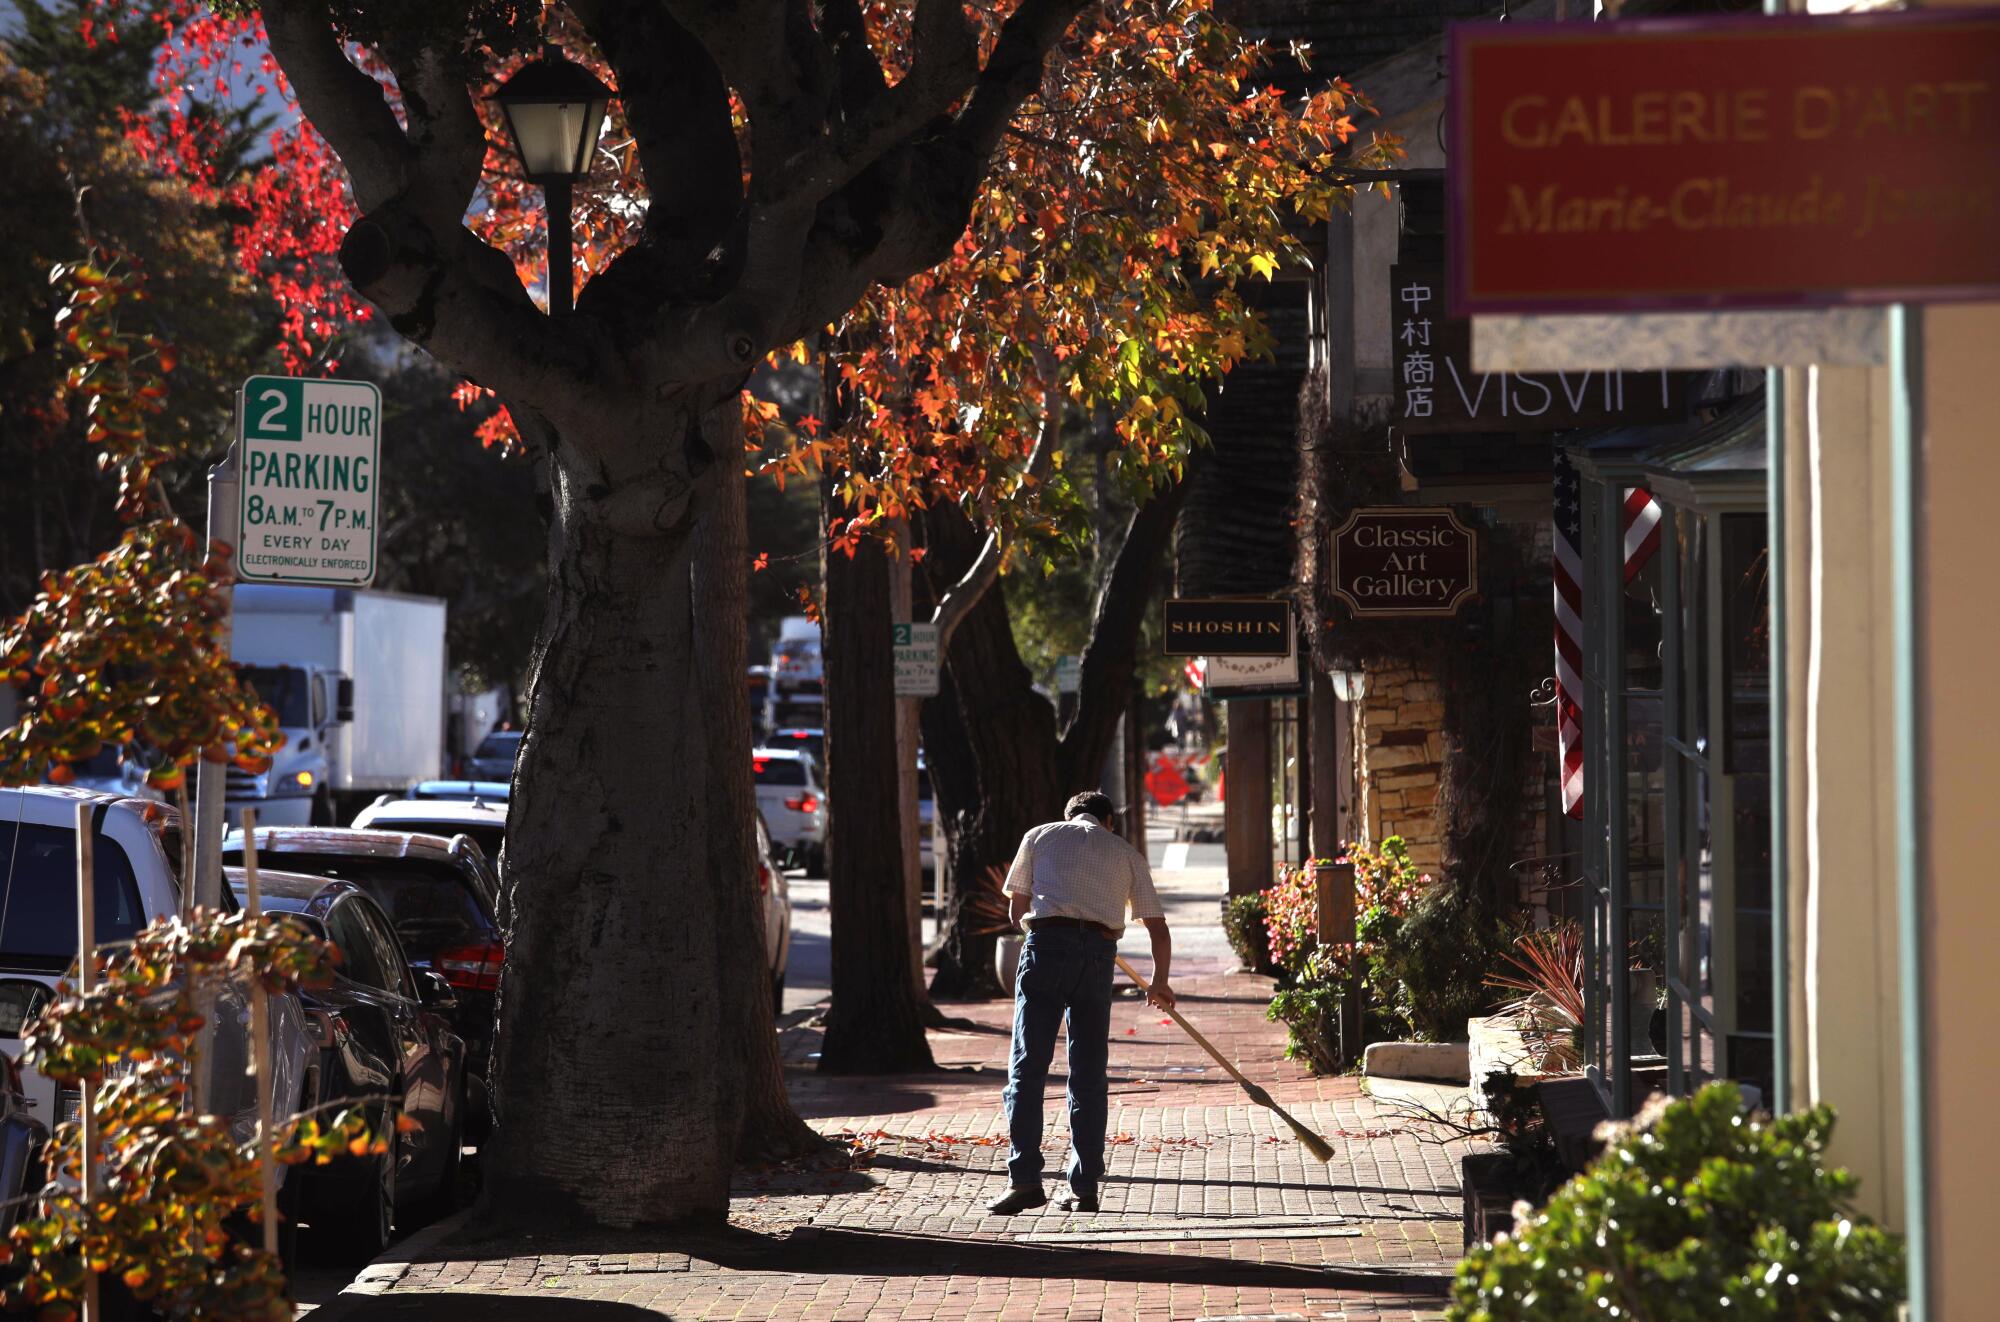 A man sweeps the sidewalk along San Carlos Street, between 5th & 6th streets, in downtown Carmel-by-the-Sea.